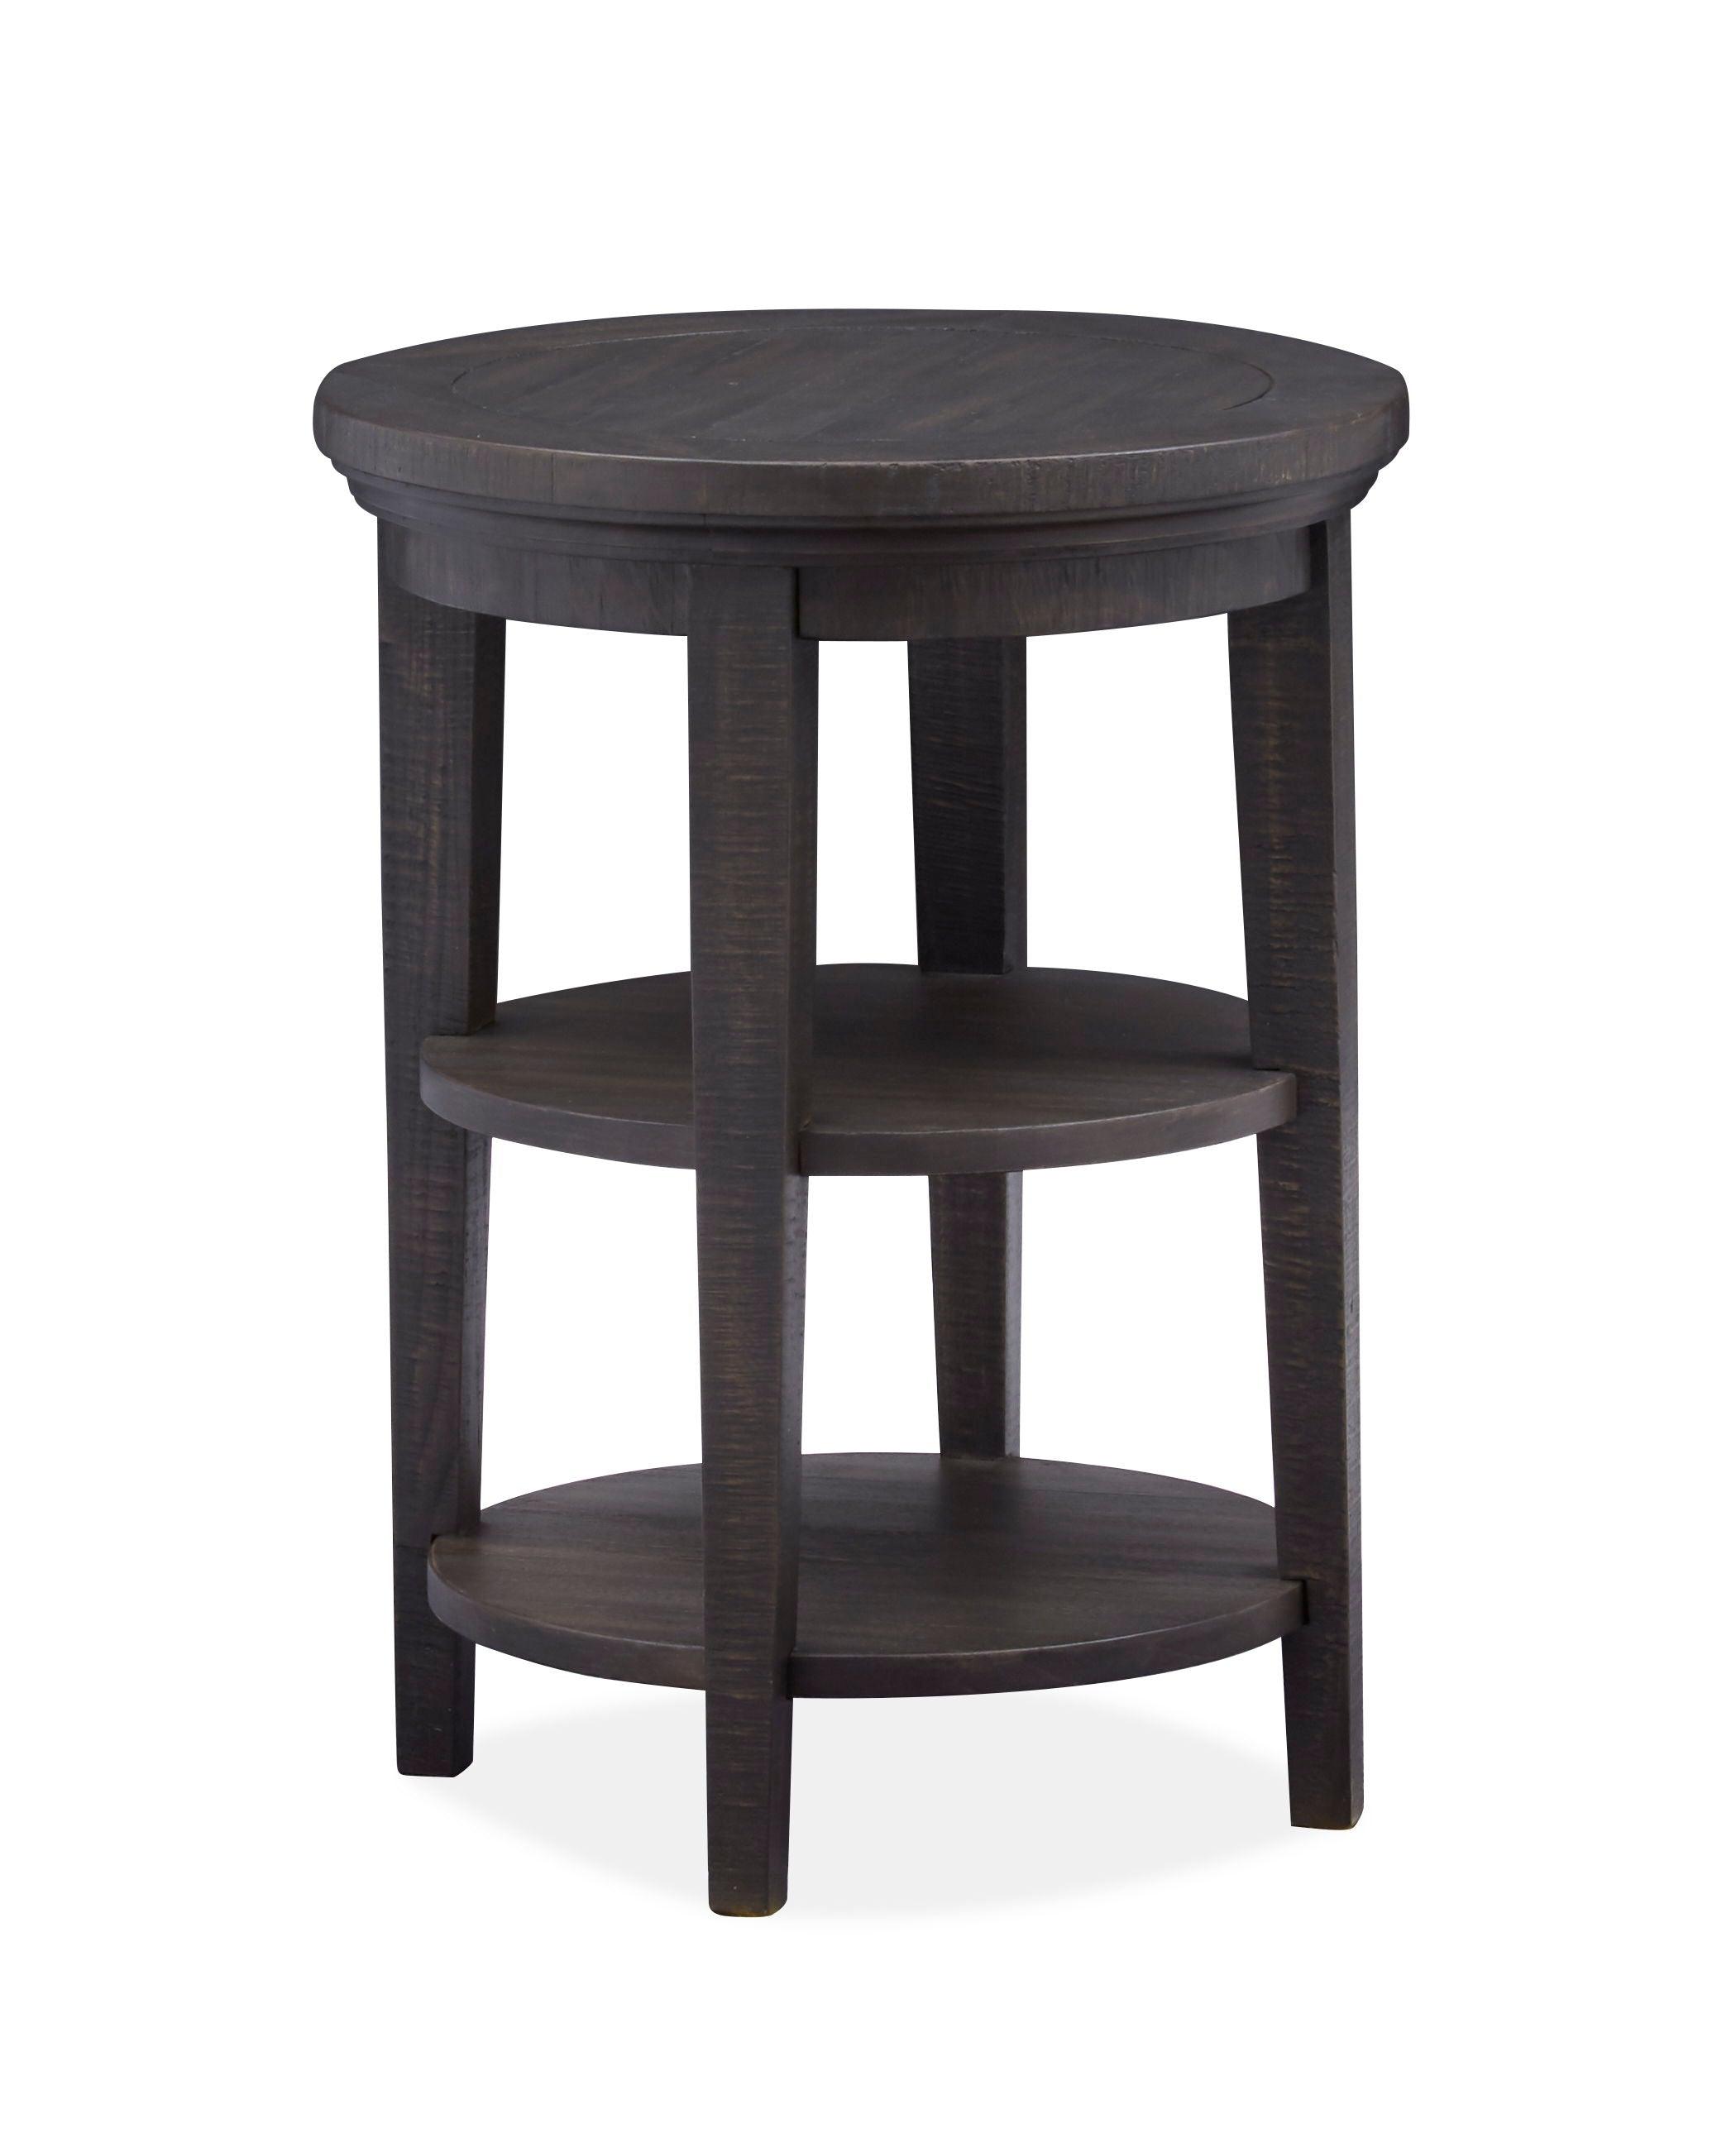 Magnussen Furniture - Westley Falls - Round Accent End Table - Graphite - 5th Avenue Furniture